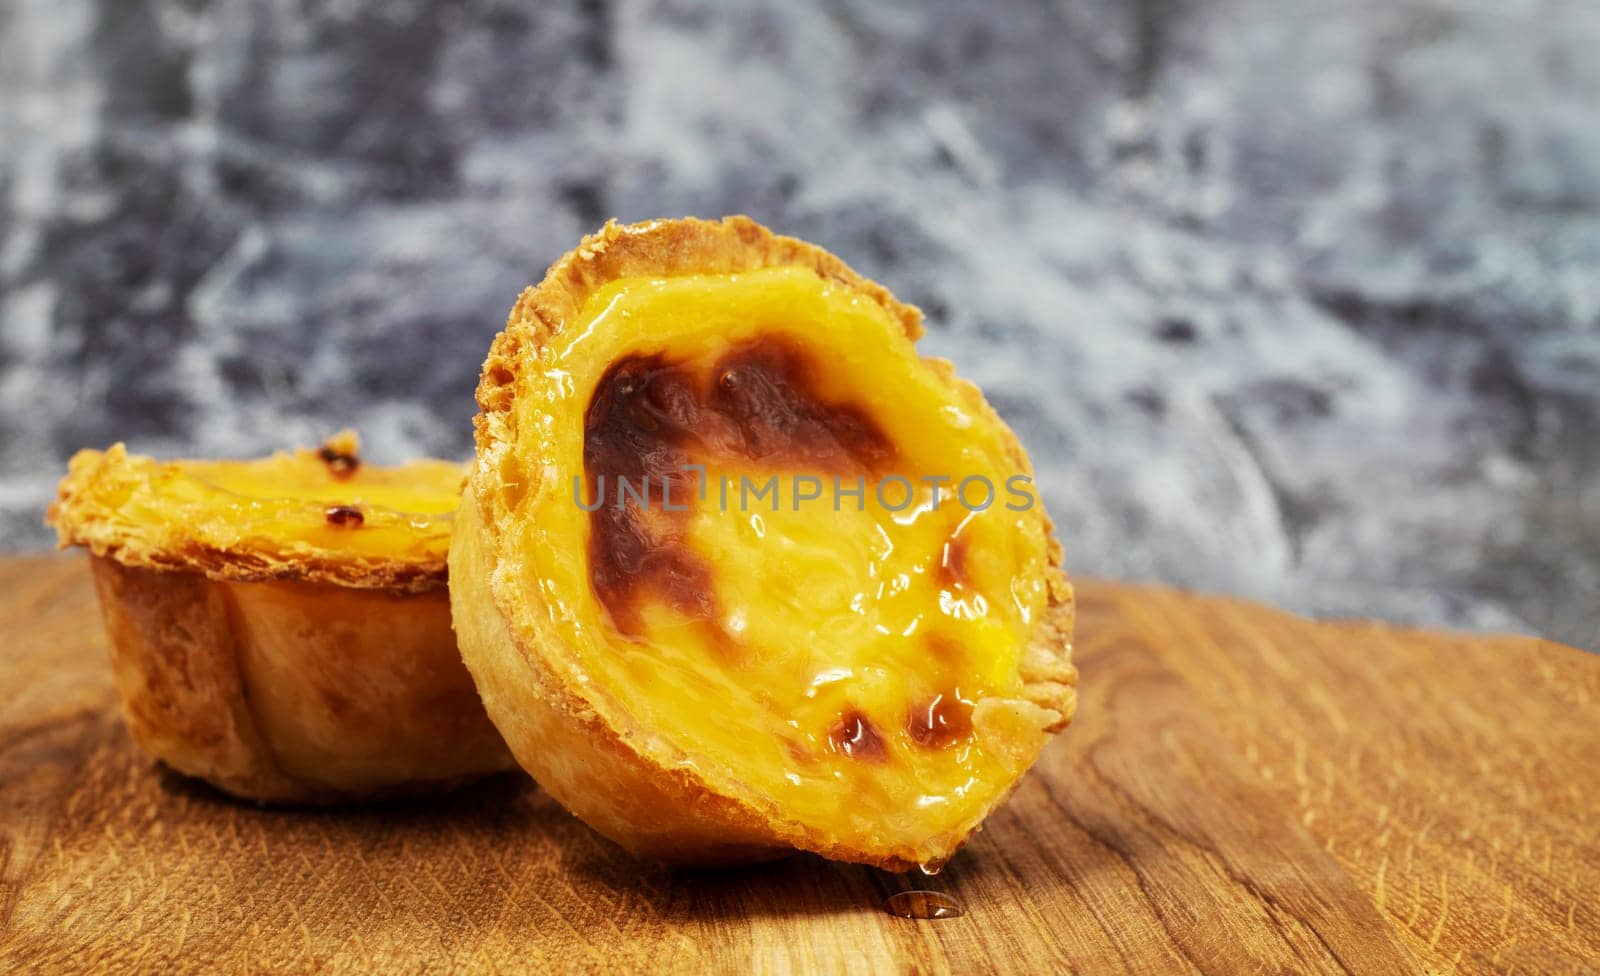 Pastel de nata tarts or Portuguese egg tart on a wooden brown background. Pastel de Belem is a small pie with a crispy puff pastry crust and a custard cream filling. Sweet dessert. by Roshchyn